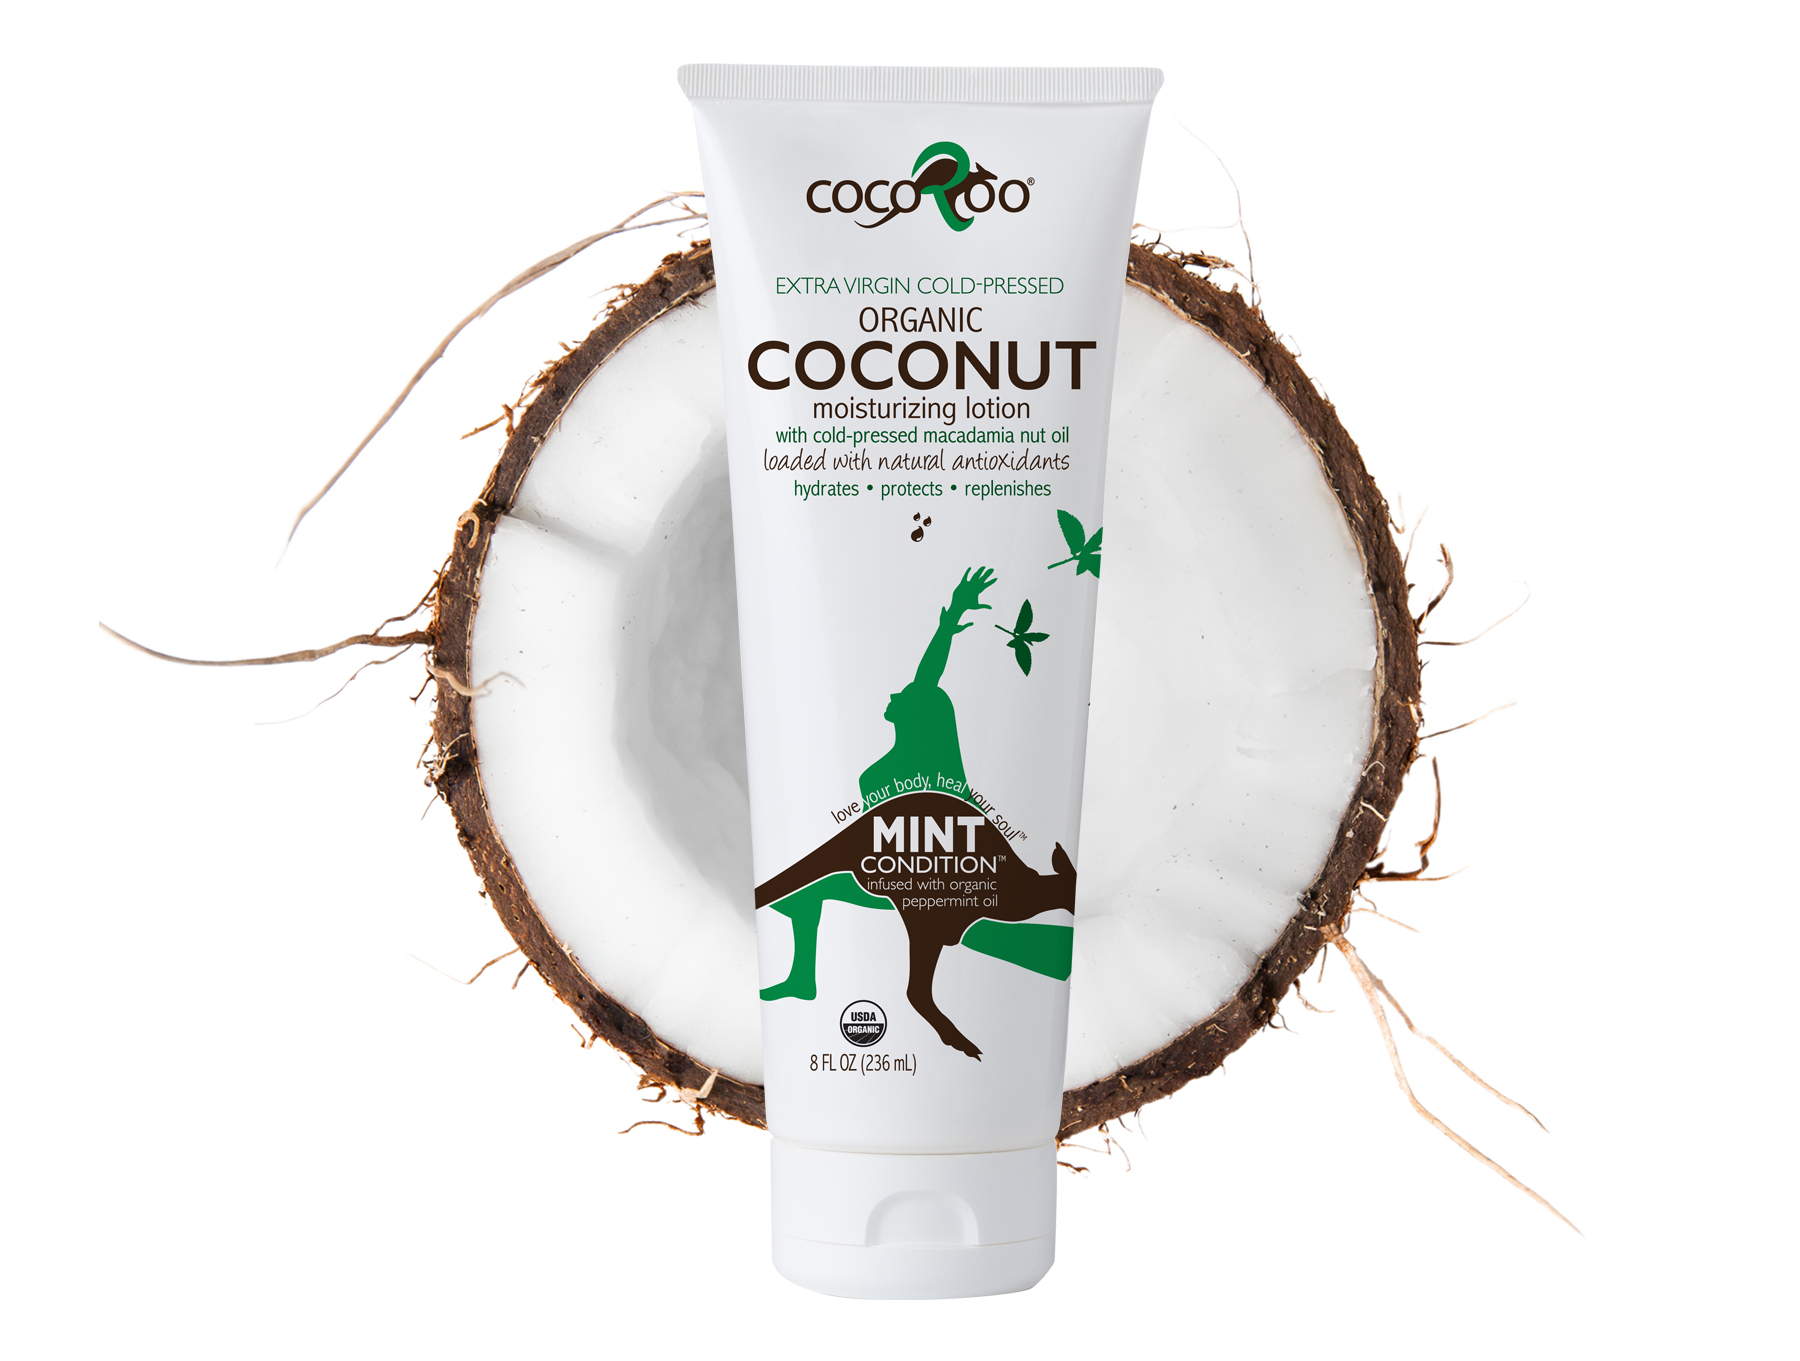 Oil Pulling with CoCoRoo’s Mint Condition